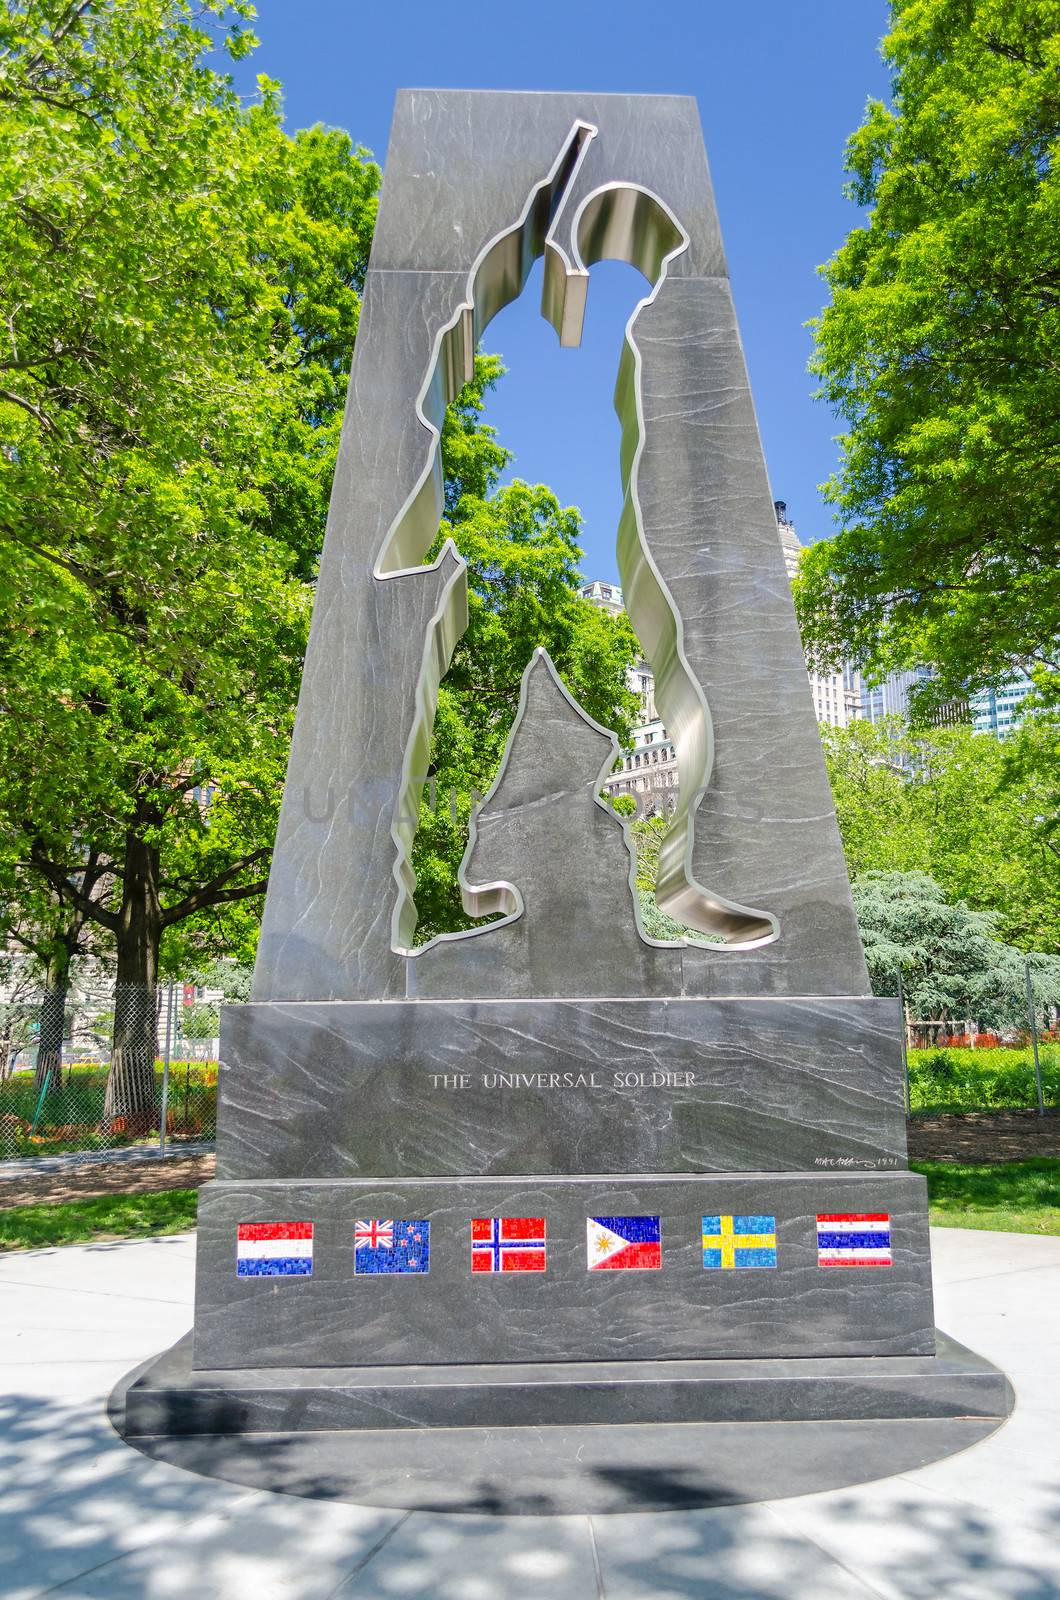 NEW YORK - MAY 27:Korean War Memorial in Battery Park on May 27, 2013. The memorial, dating back 1991, was designed by the artist Mac Adams and honors military who served in the Korean War